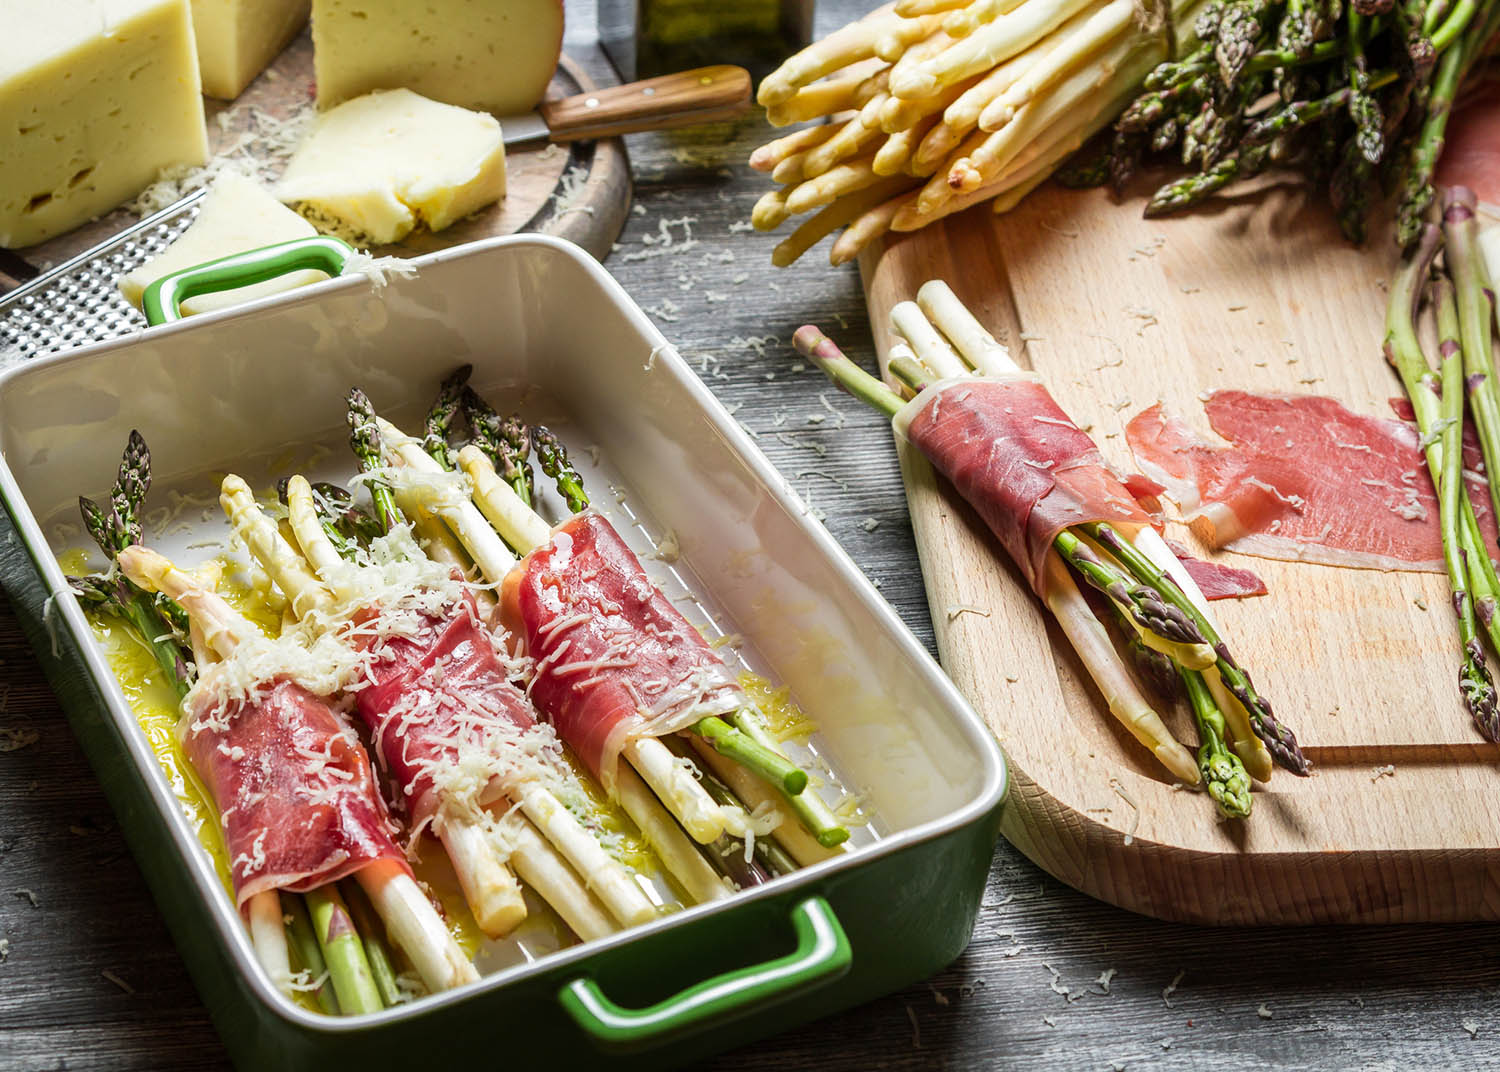 Preparation of asparagus wrapped in Parma ham with cheese.